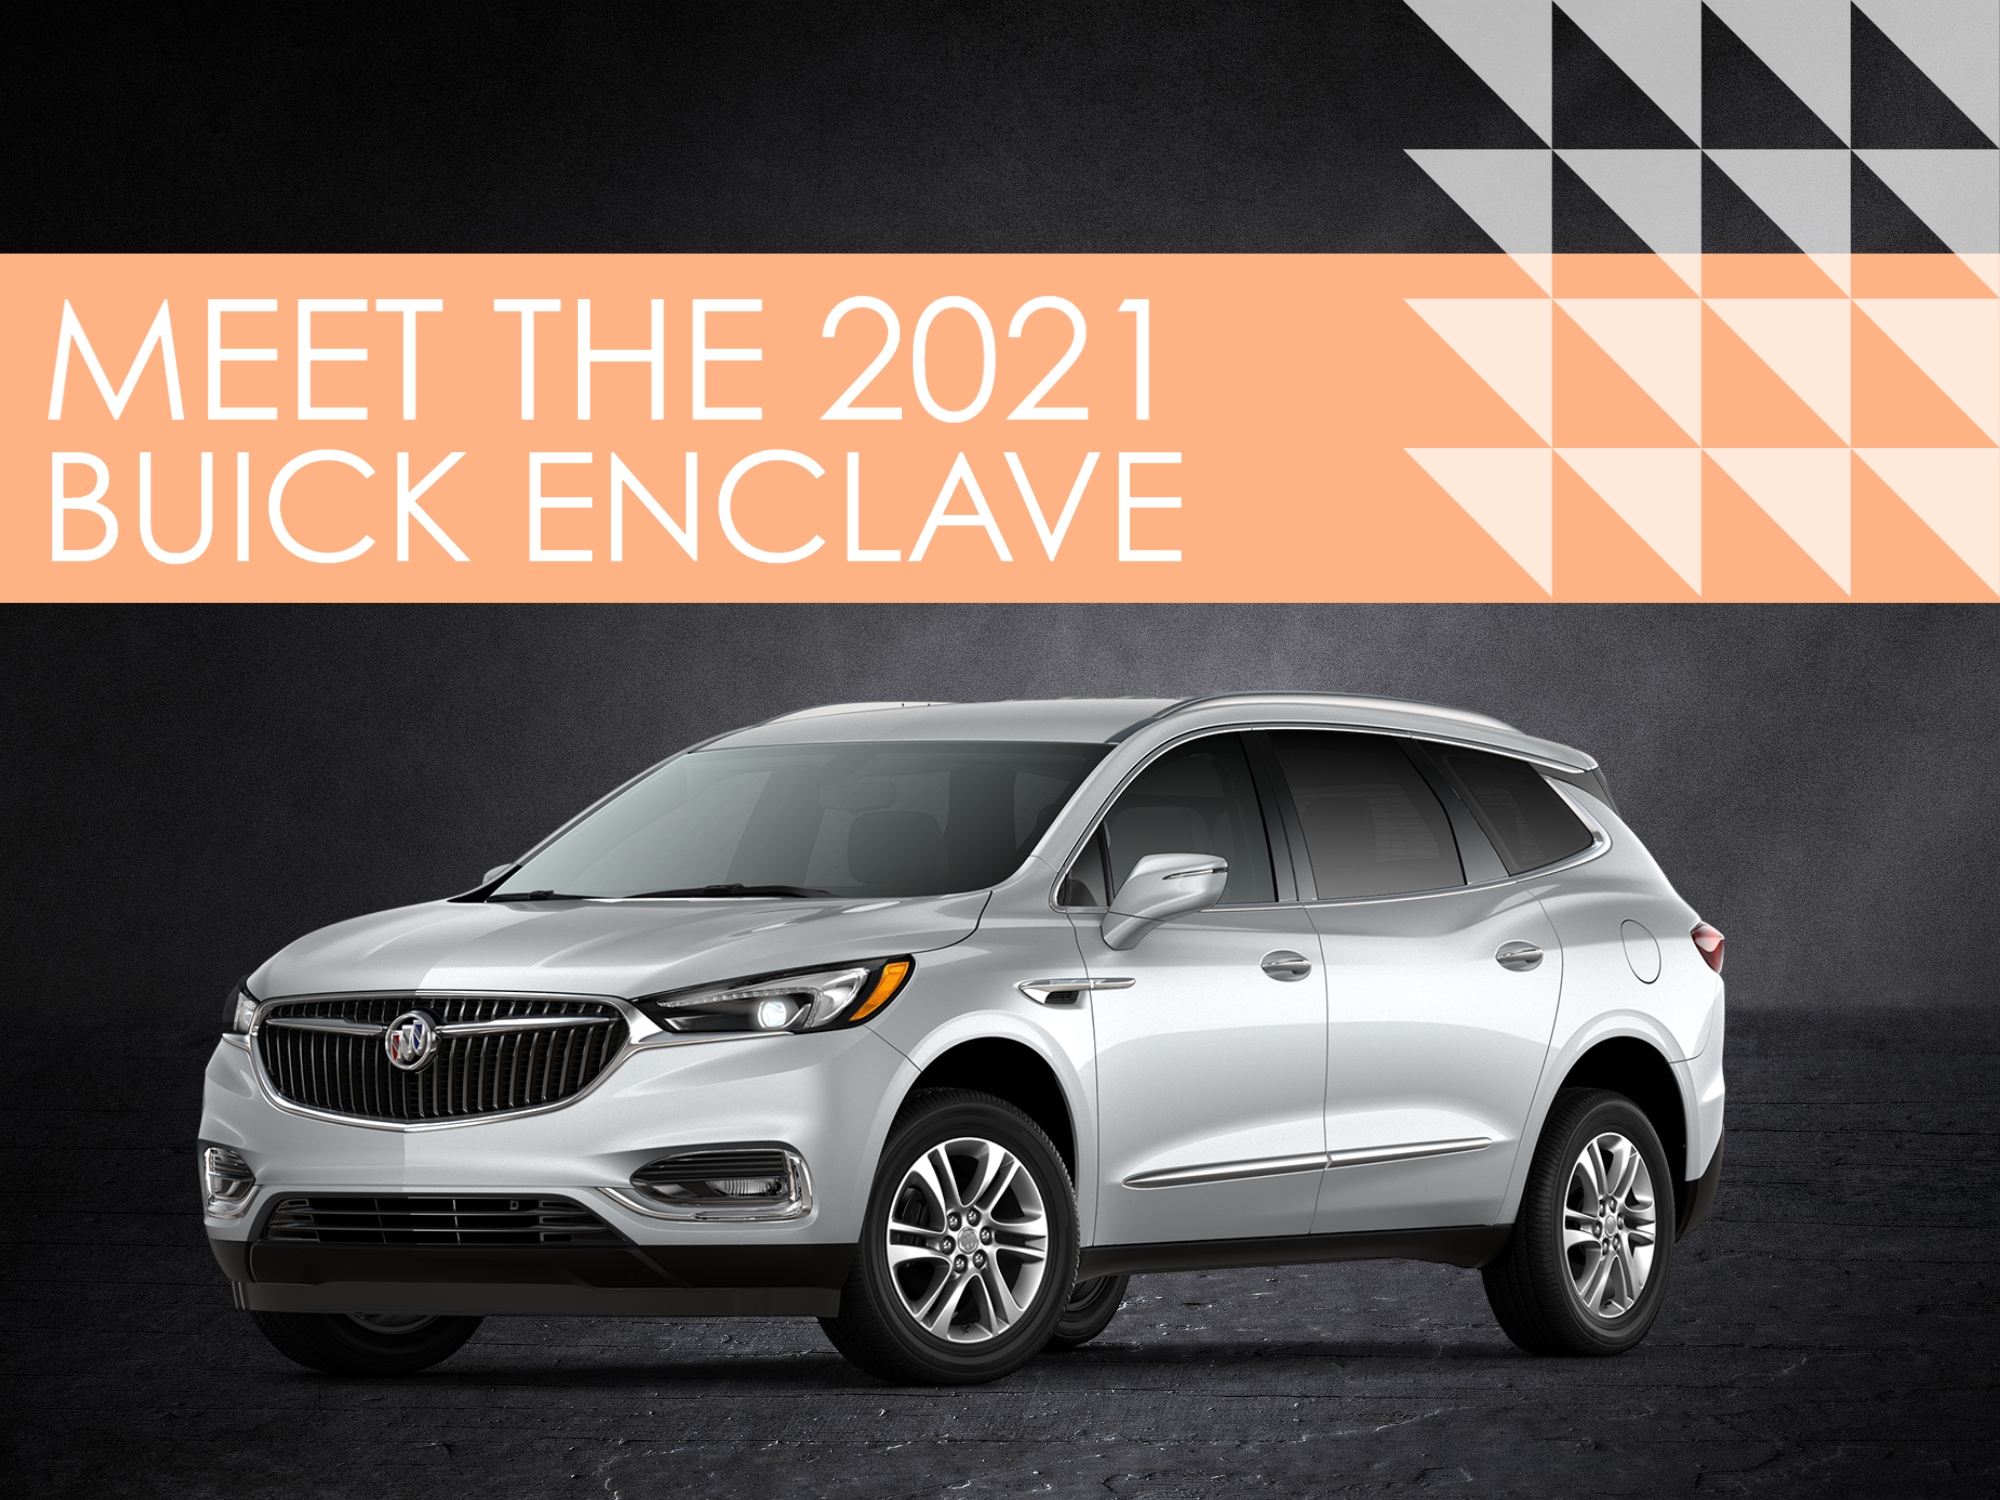 Front 3/4 view of new Buick Enclave SUV in Silver against black background